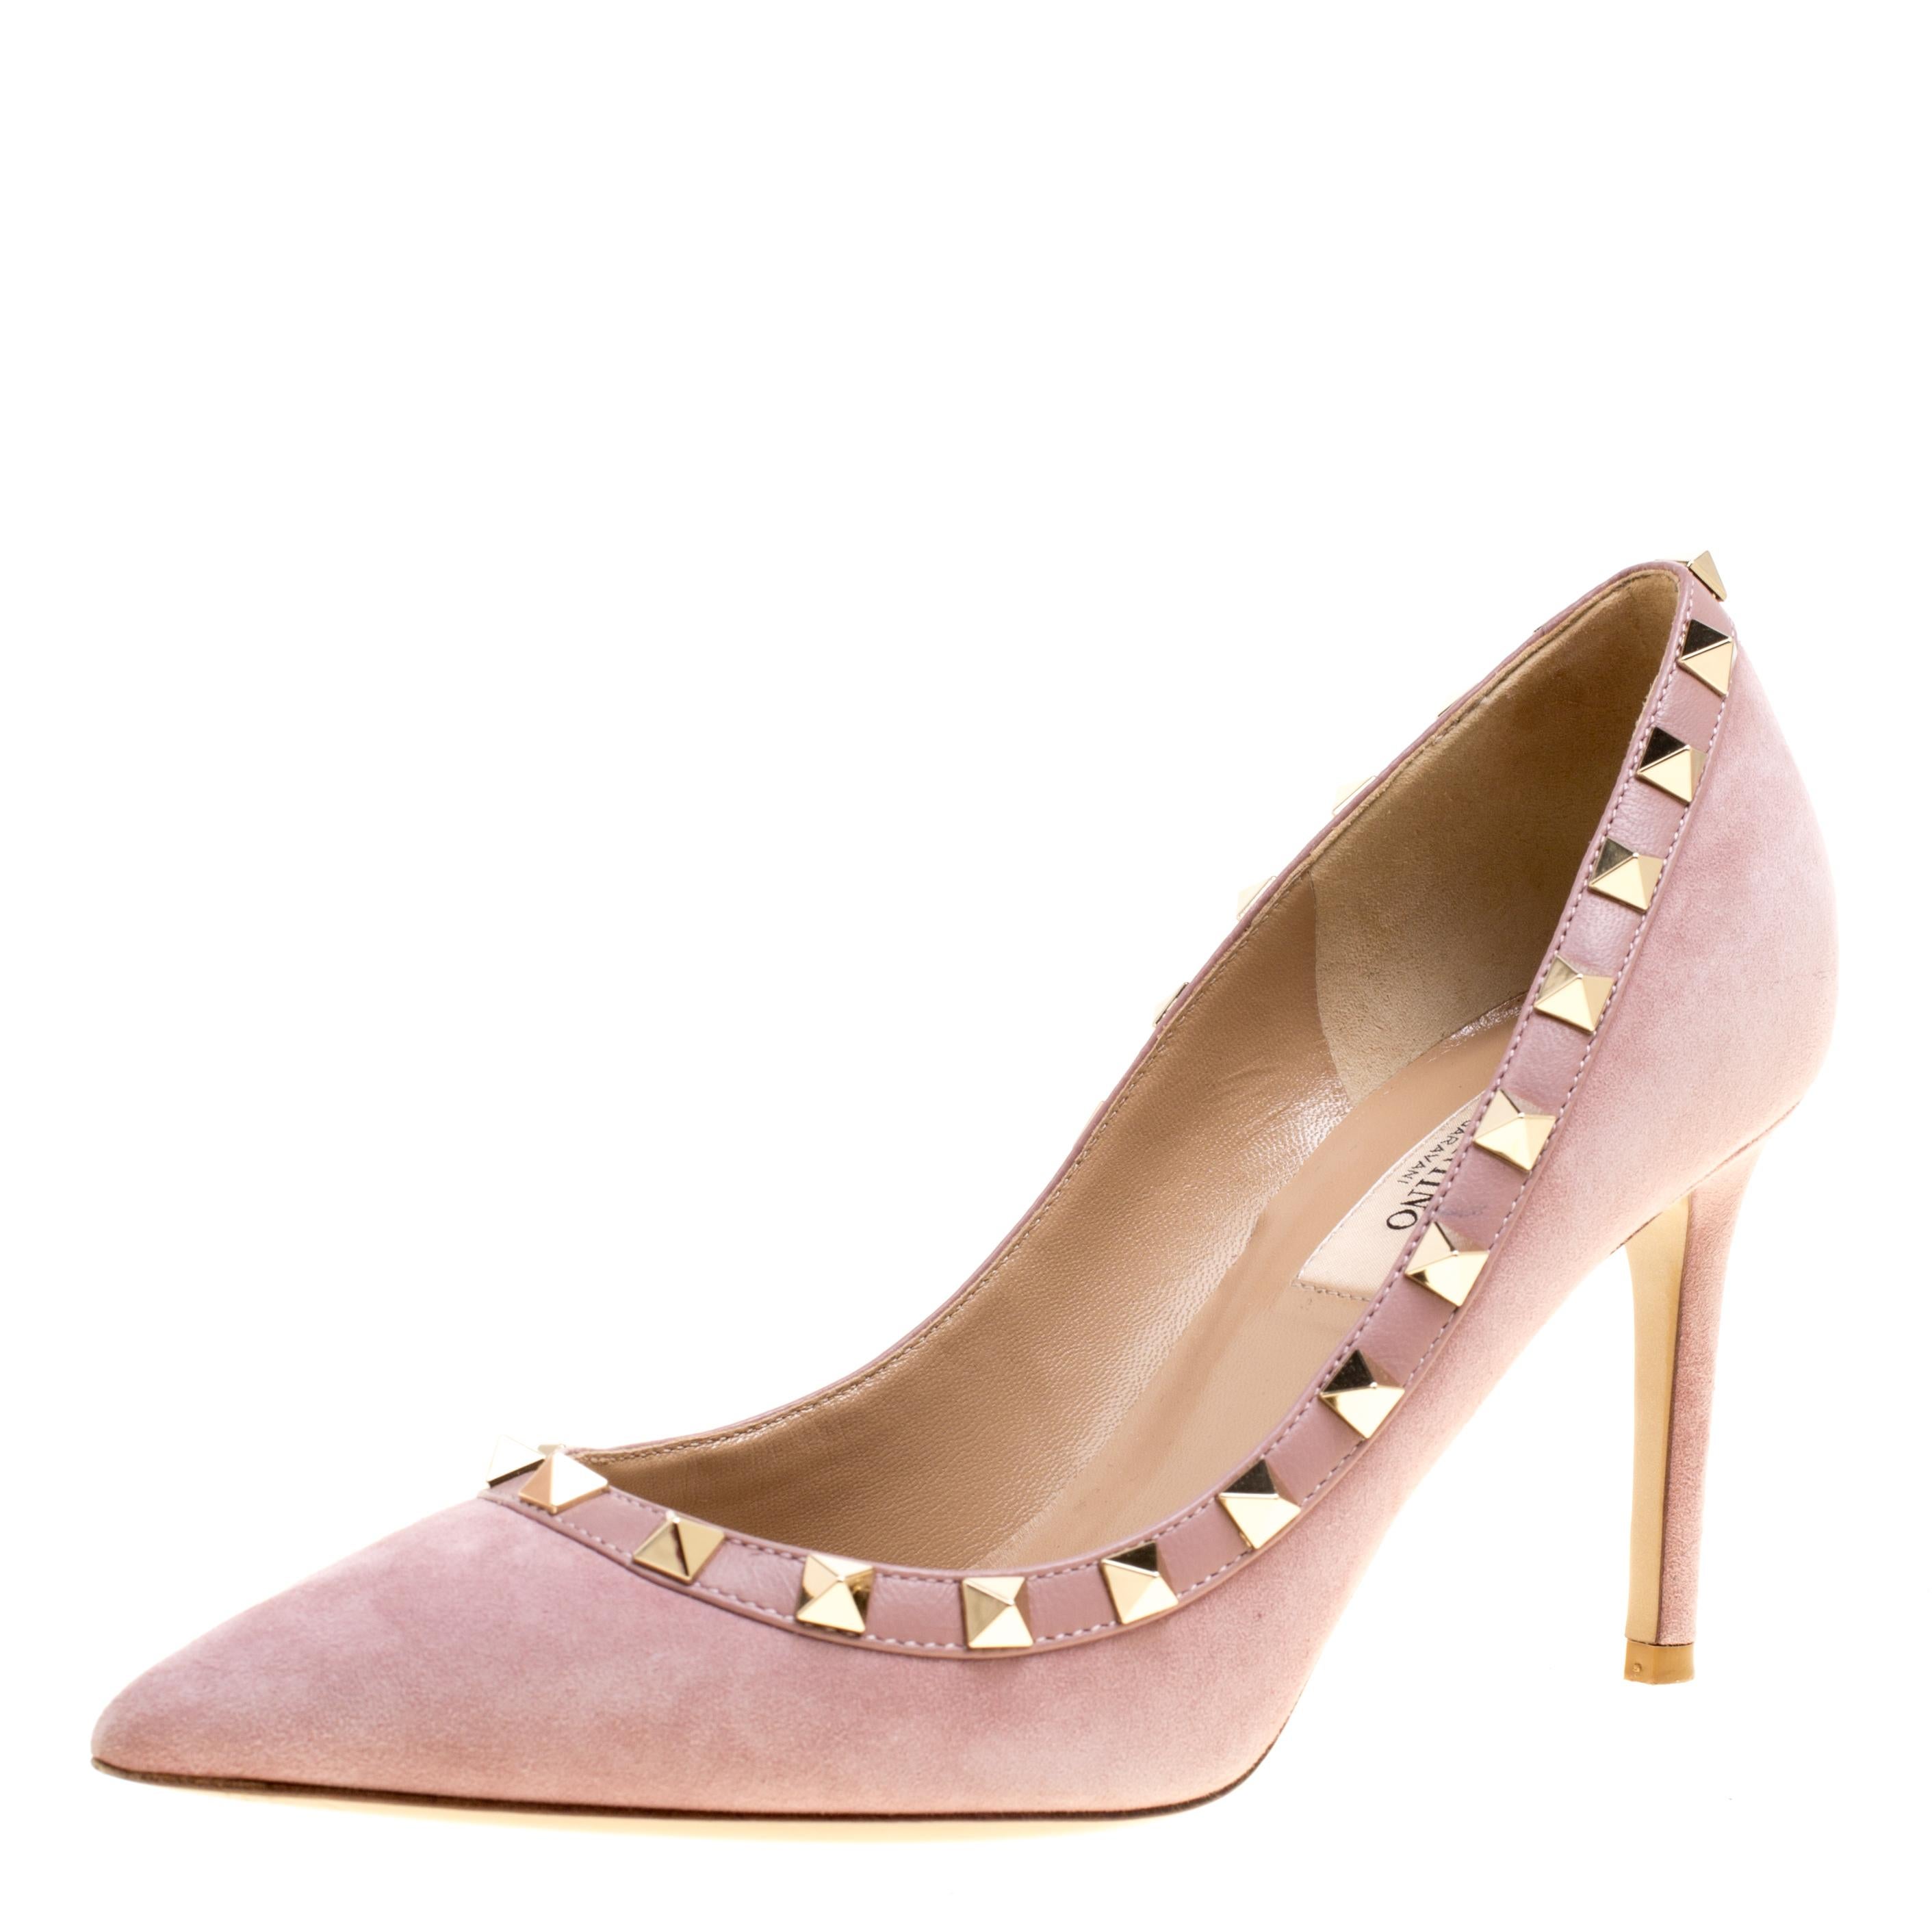 Jazz up your attire with this pair of lilac pumps designed by Valentino. They carry an exterior made from suede and gloriously decorated with the signature Rockstuds on the leather trim. The pair is complete with pointed toes, leather insoles and